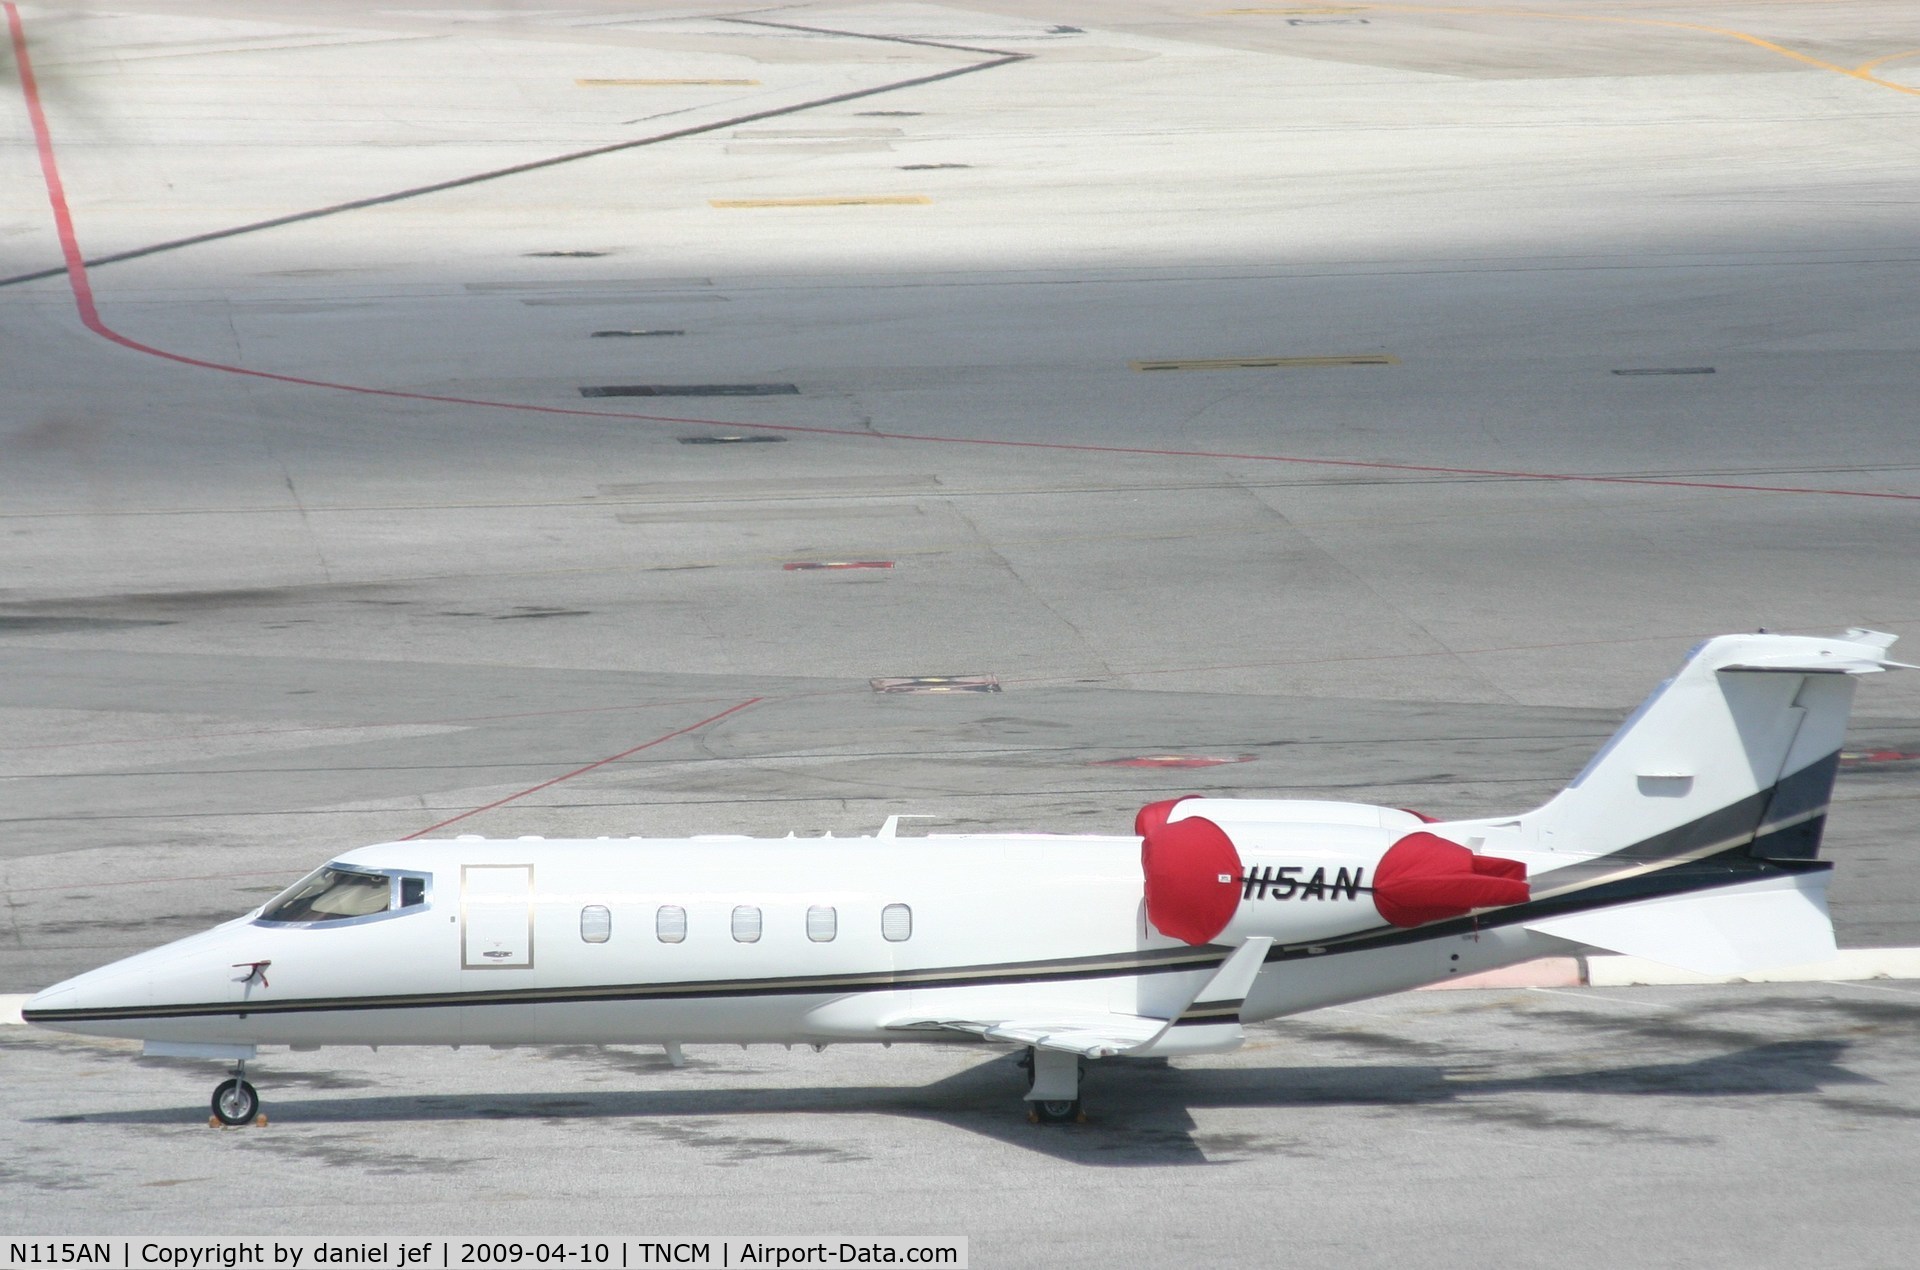 N115AN, 2006 Learjet 60 C/N 308, park at the  tncm ramp